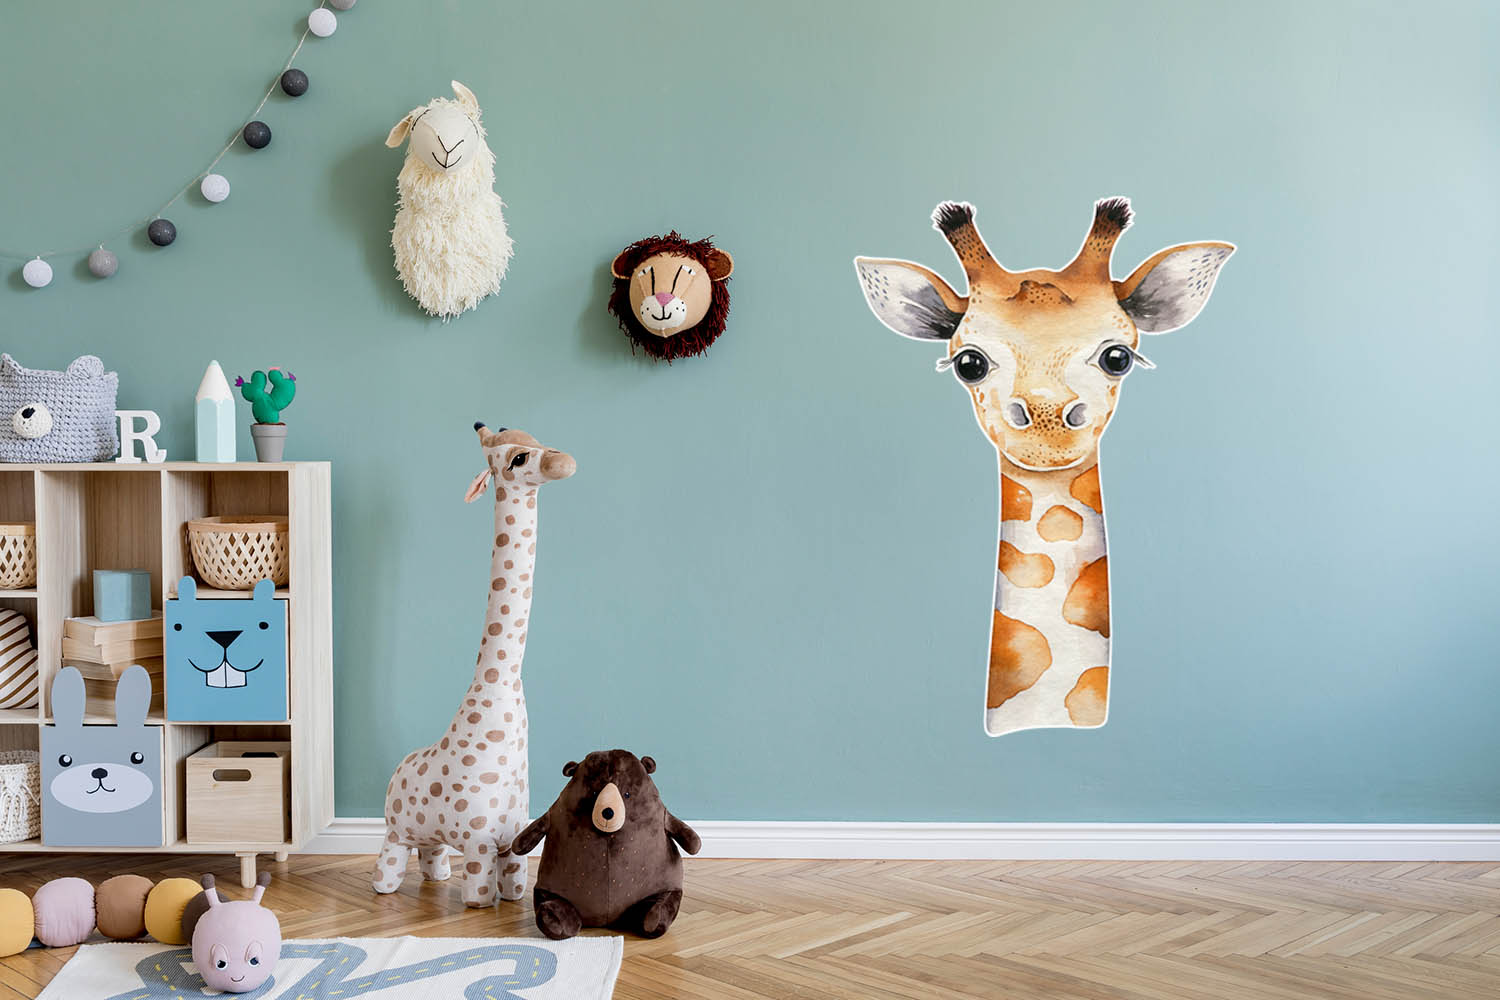 Giraffe Pastel Head, Wall Decal Sticker, Removable with NO wall Damage!